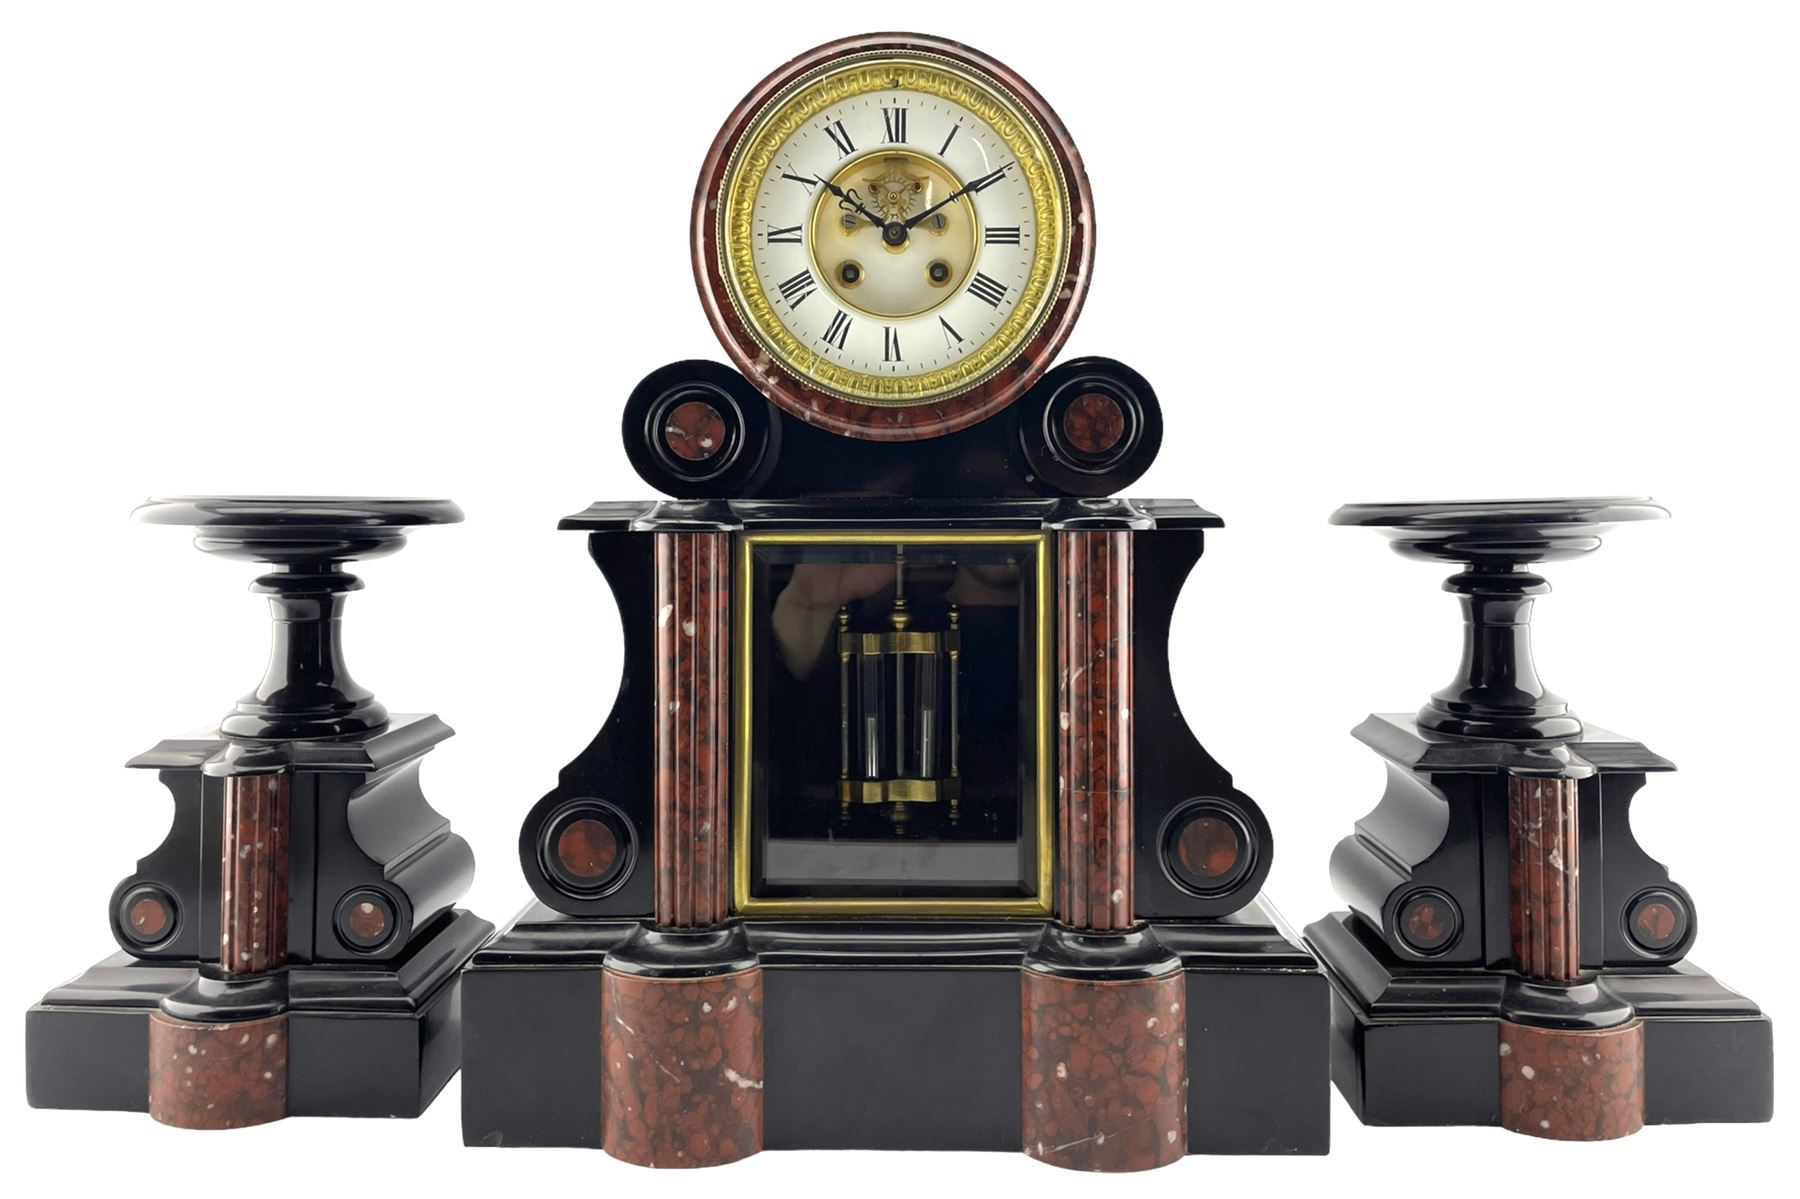 Mougin of Paris - late 19th century 8-day Belgium slate mantle clock with a pair of conforming tazas